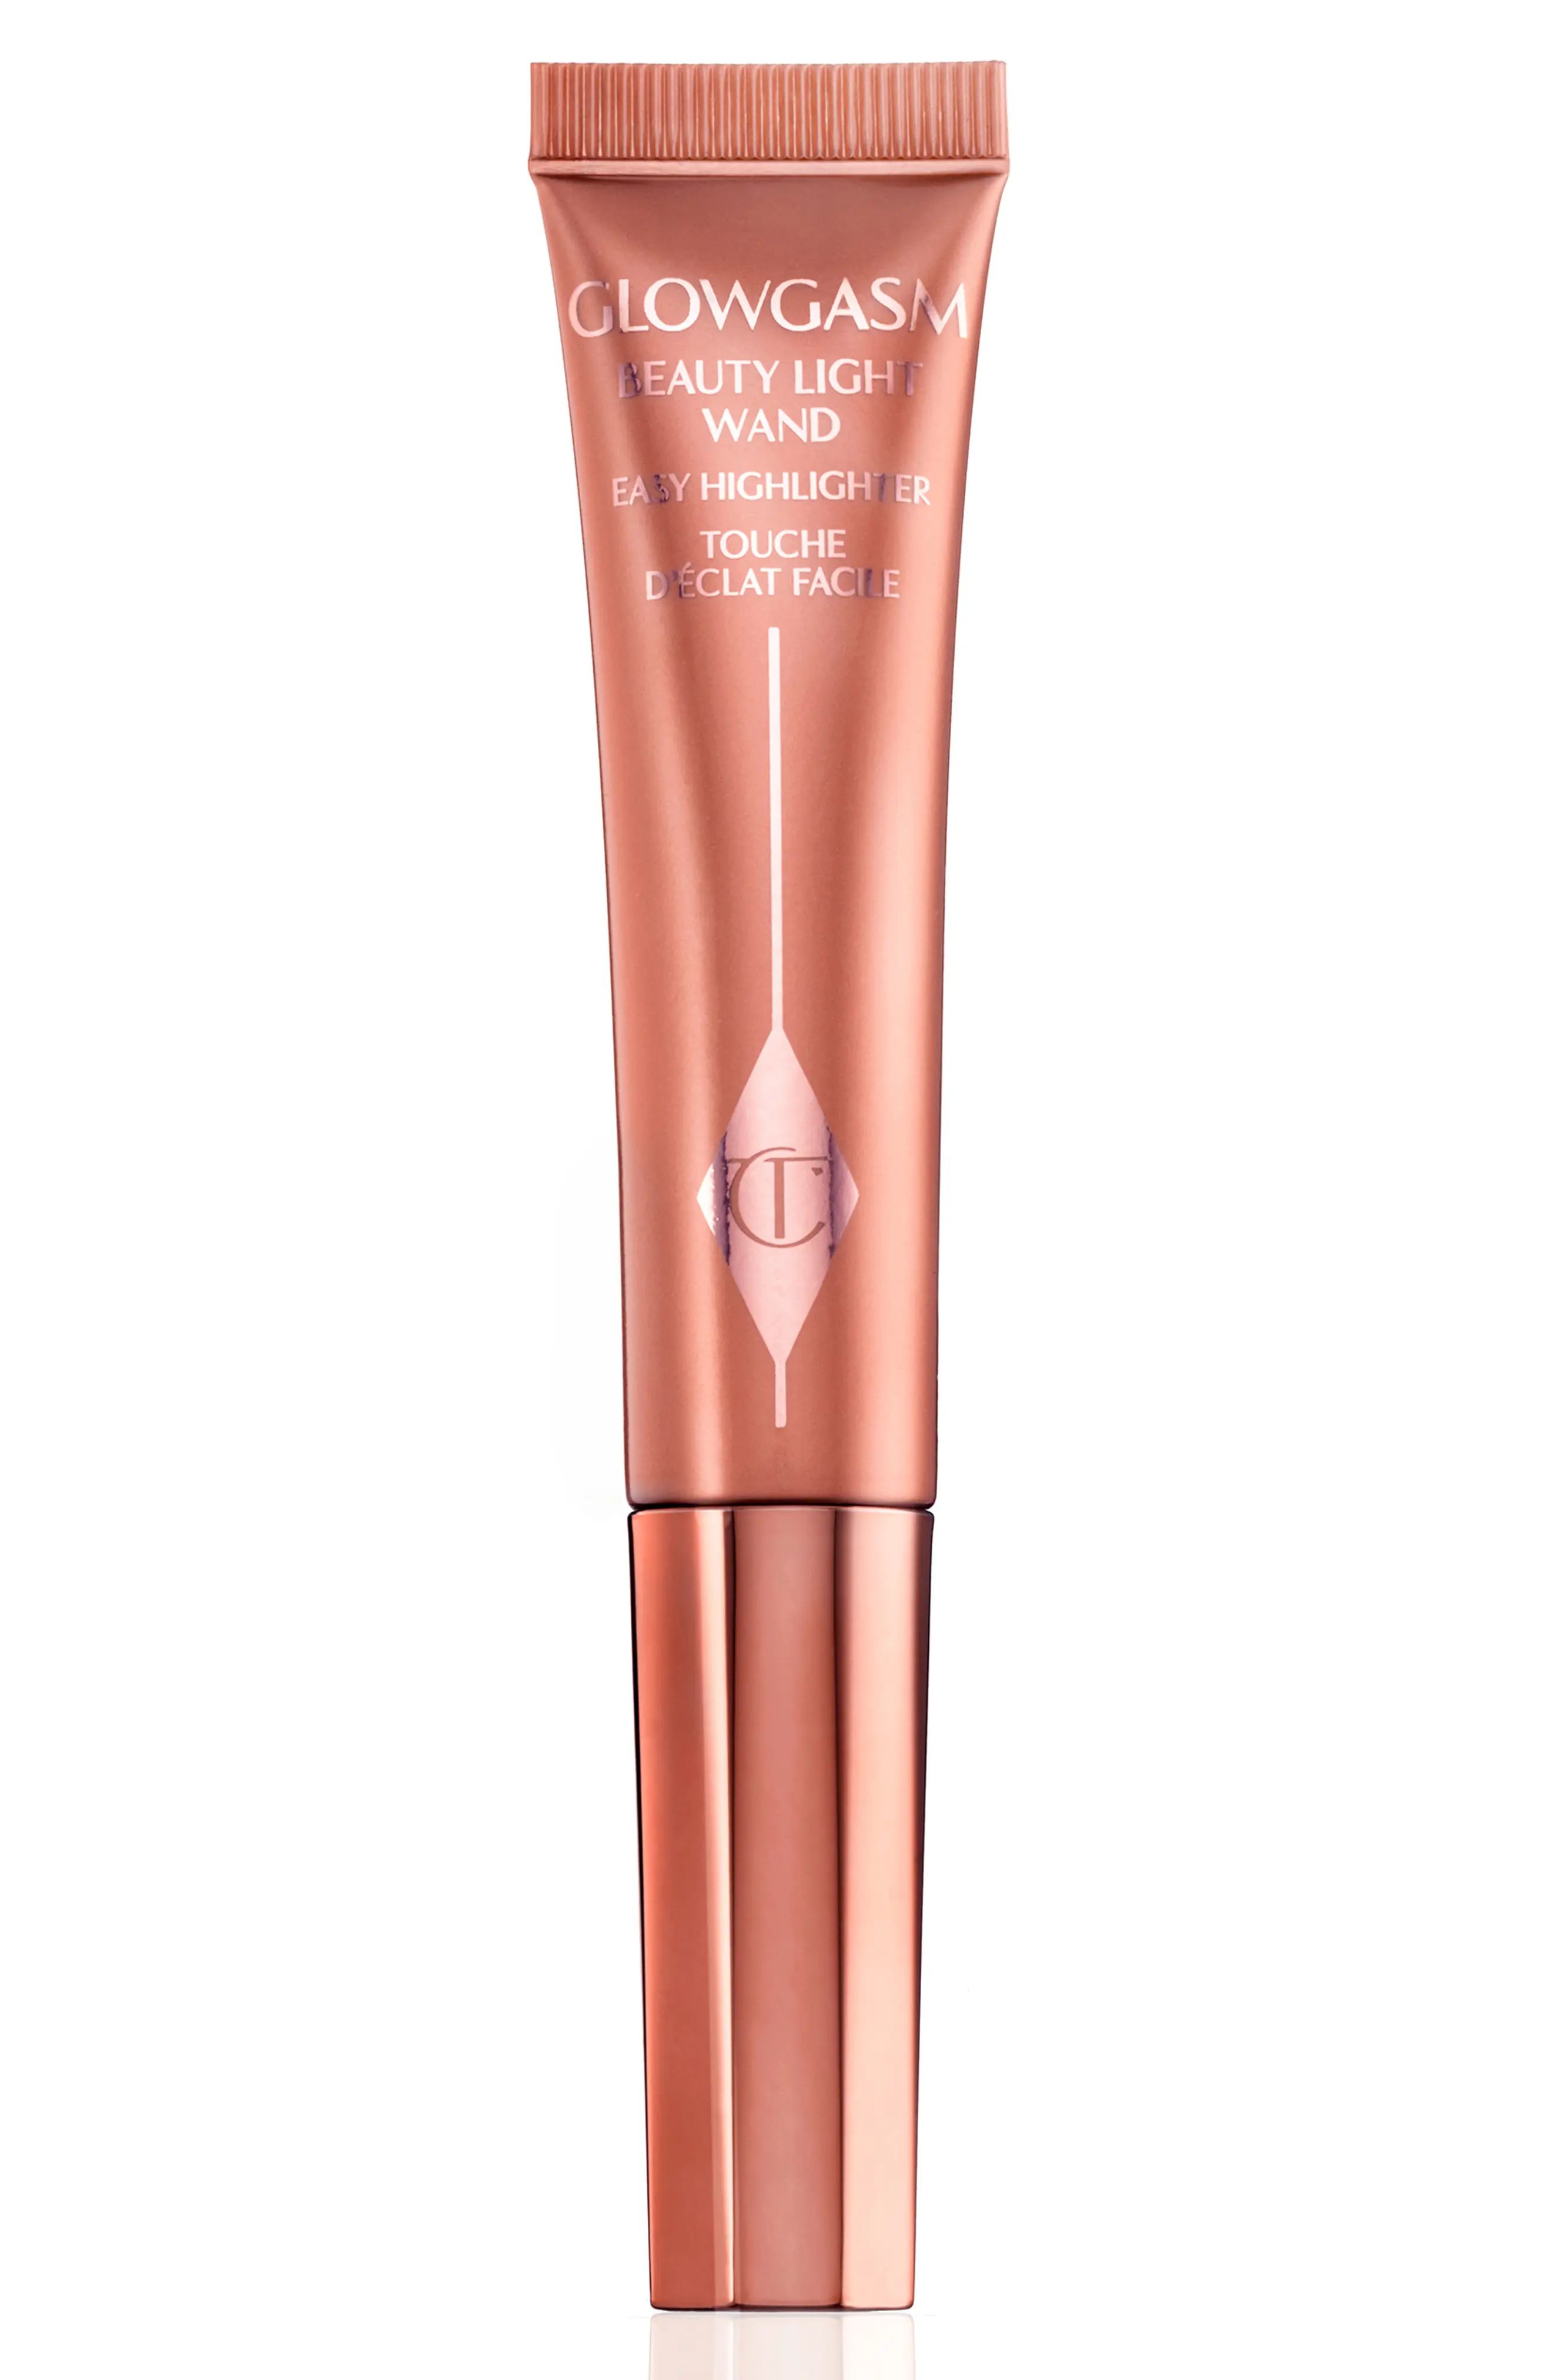 Charlotte Tilbury Glowgasm Beauty Wand Highlighter in Pinkgasm at Nordstrom | Nordstrom